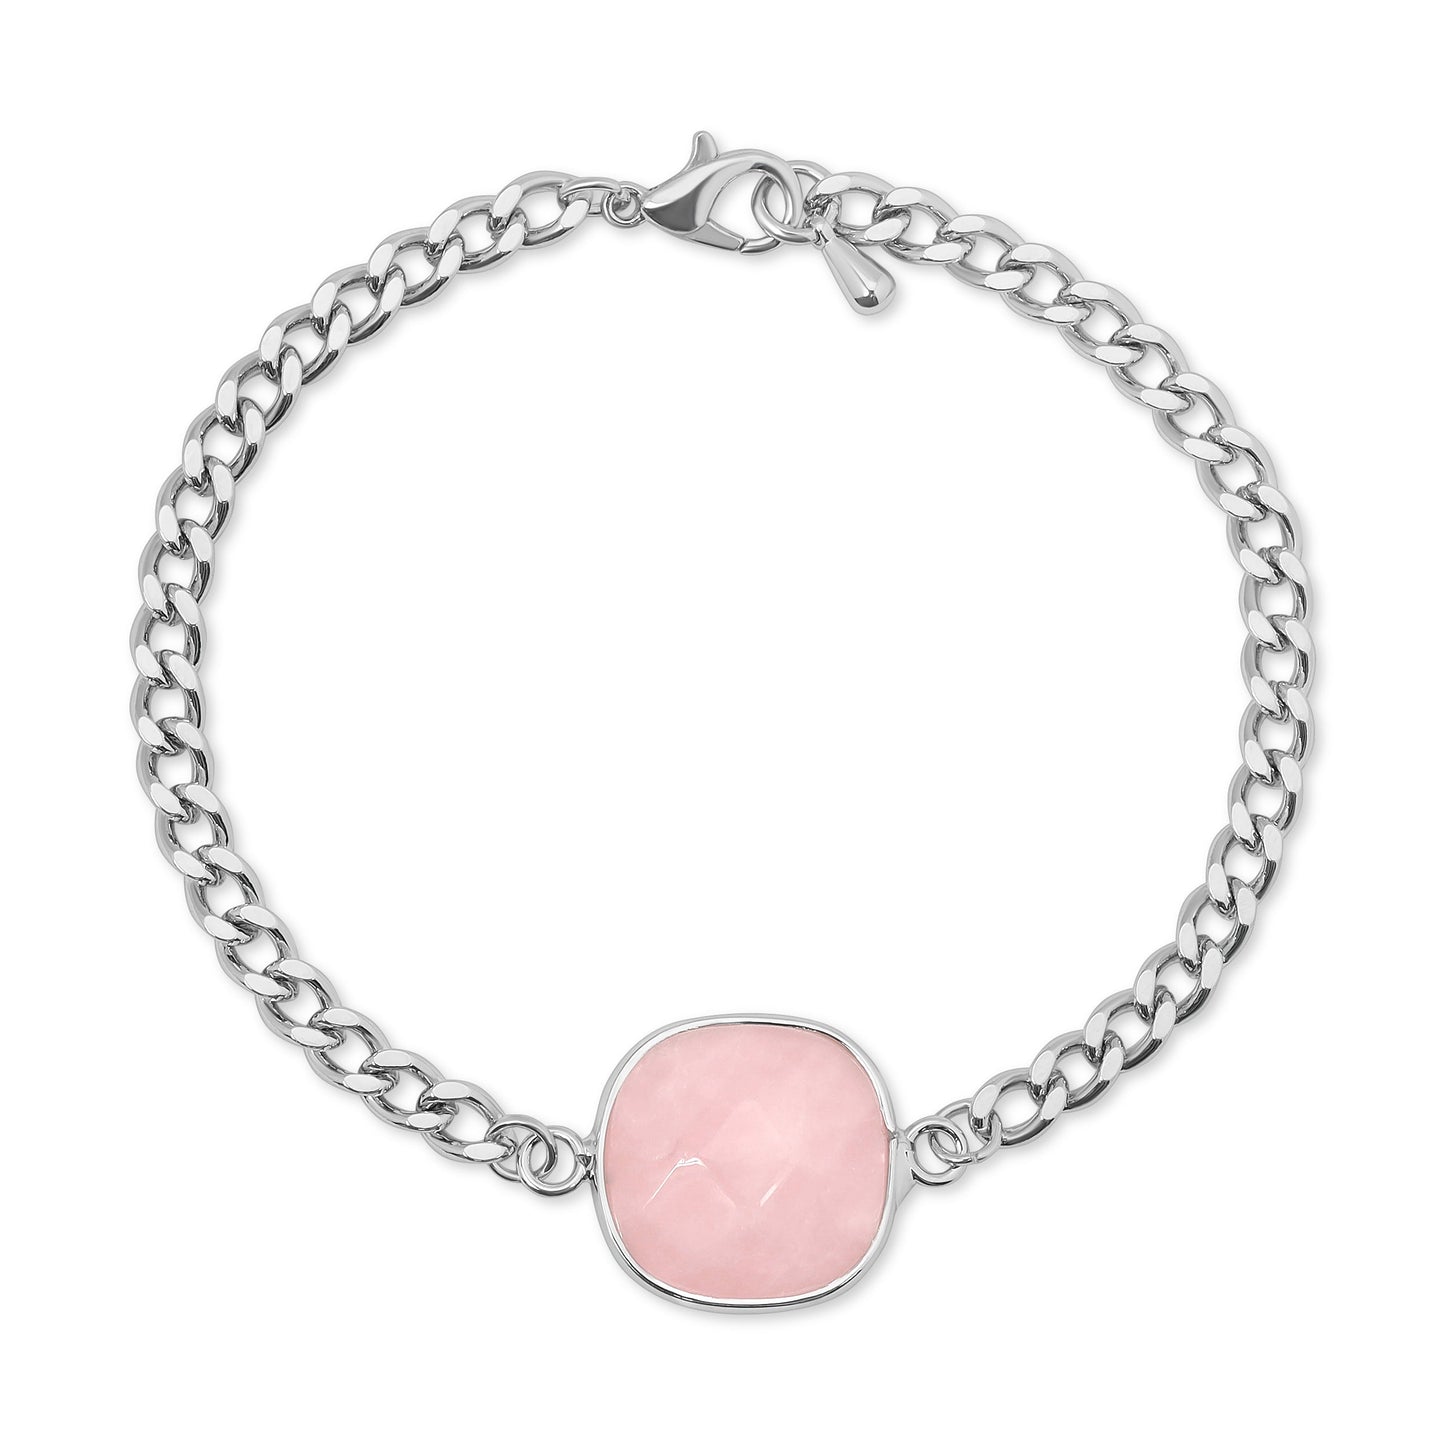 rose quartz faceted stone with sterling silver plated curb chain bracelet